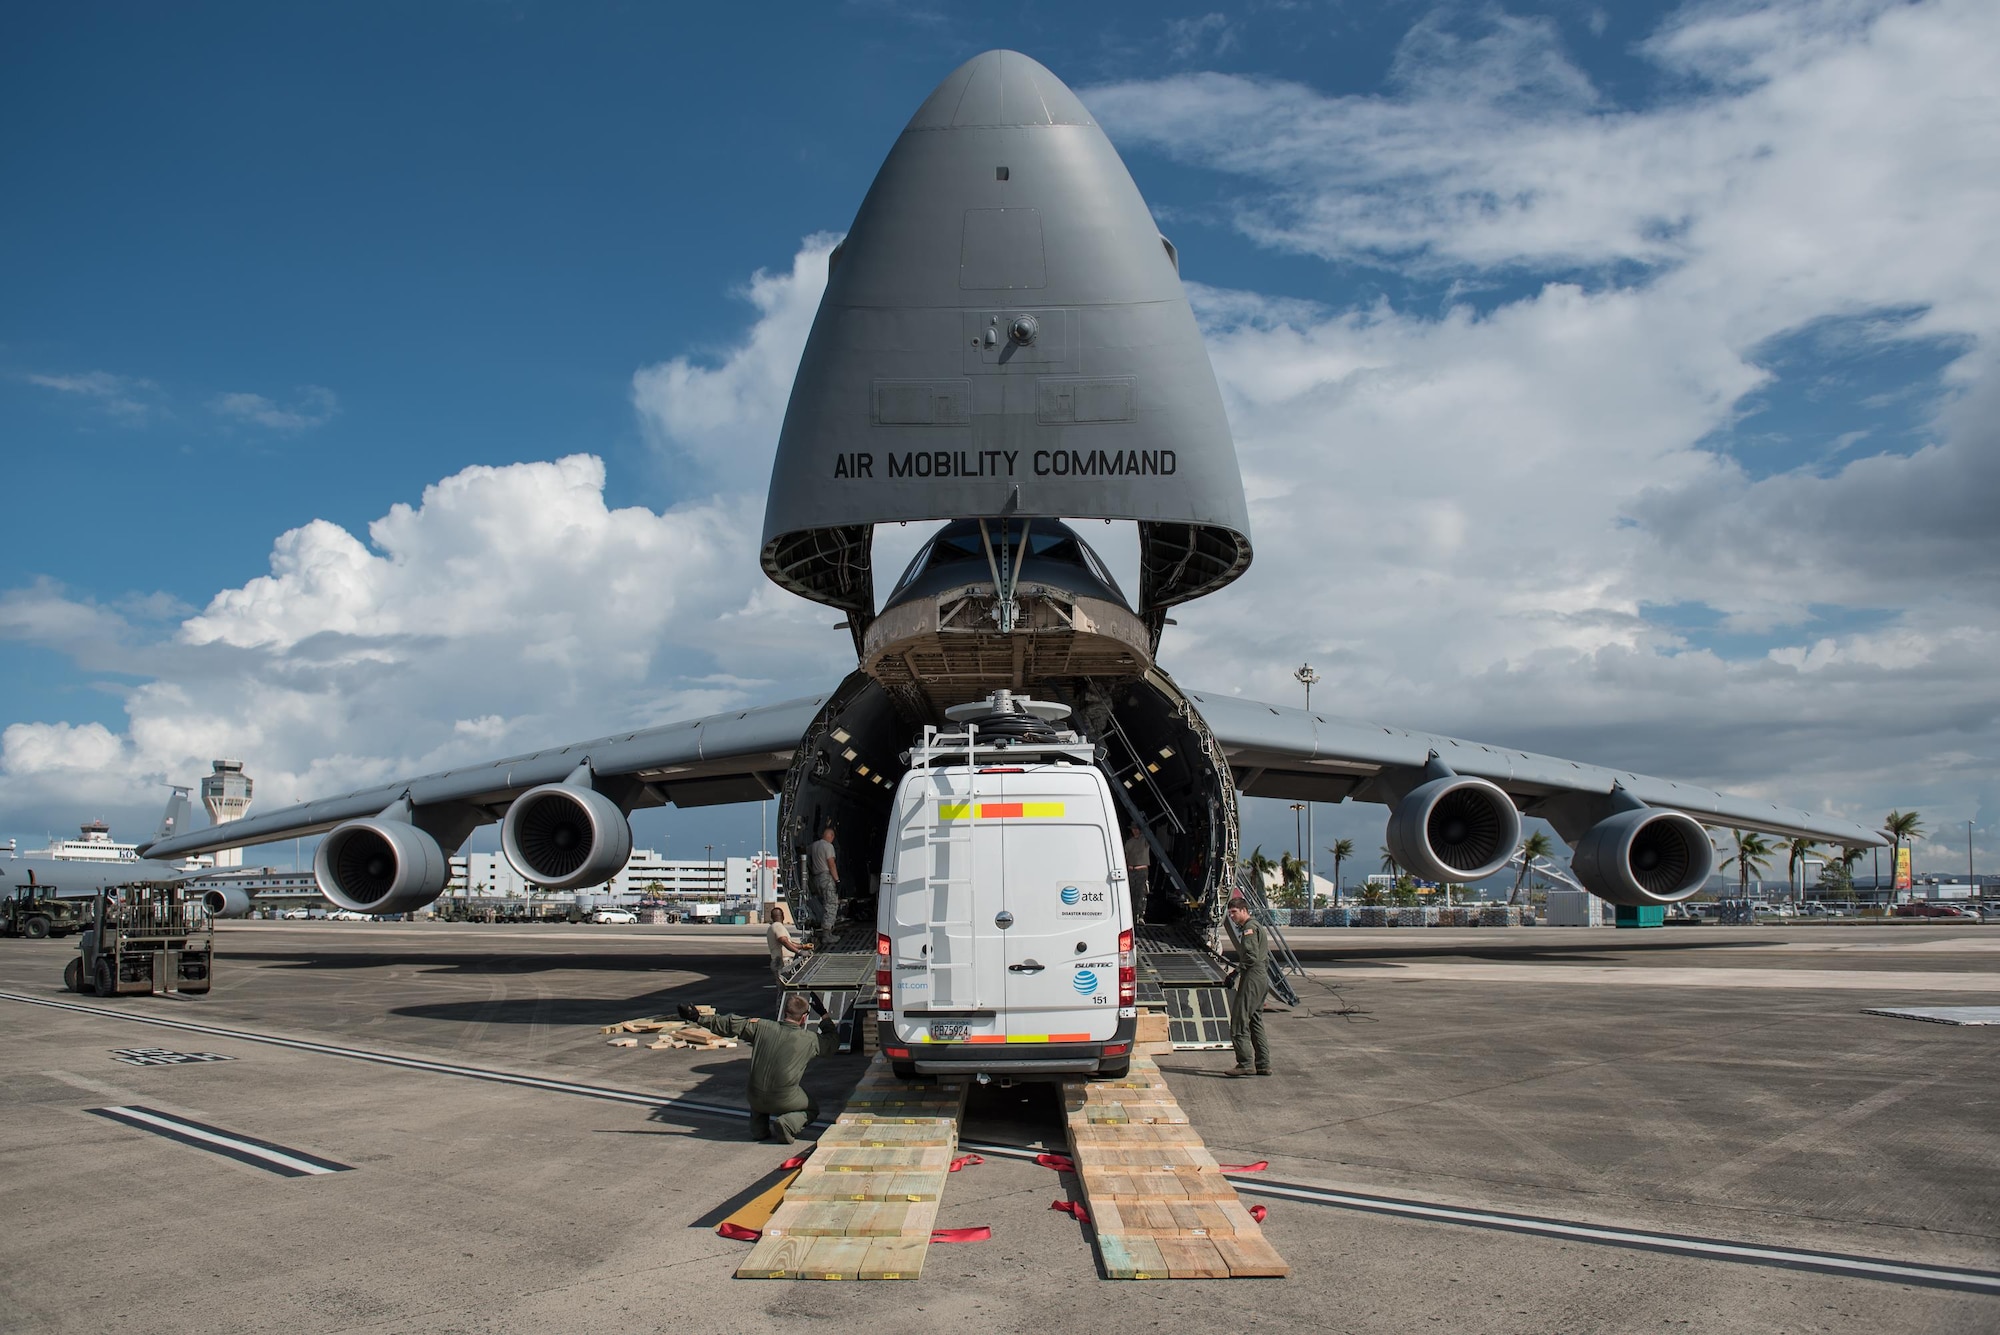 Members of the Kentucky Air National Guard’s 123rd Contingency Response Group, augmented by Airmen from the active-duty Air Force and Air National Guard units in multiple states, download a mobile cell-phone tower truck from a U.S. Air Force C-5 Galaxy at Luis Muñoz Marín International Airport in San Juan, Puerto Rico, in the wake of Hurricane Maria Oct. 6, 2017. The truck will be used to help restore cell-phone service on the island. (U.S. Air National Guard photo by Lt. Col. Dale Greer)